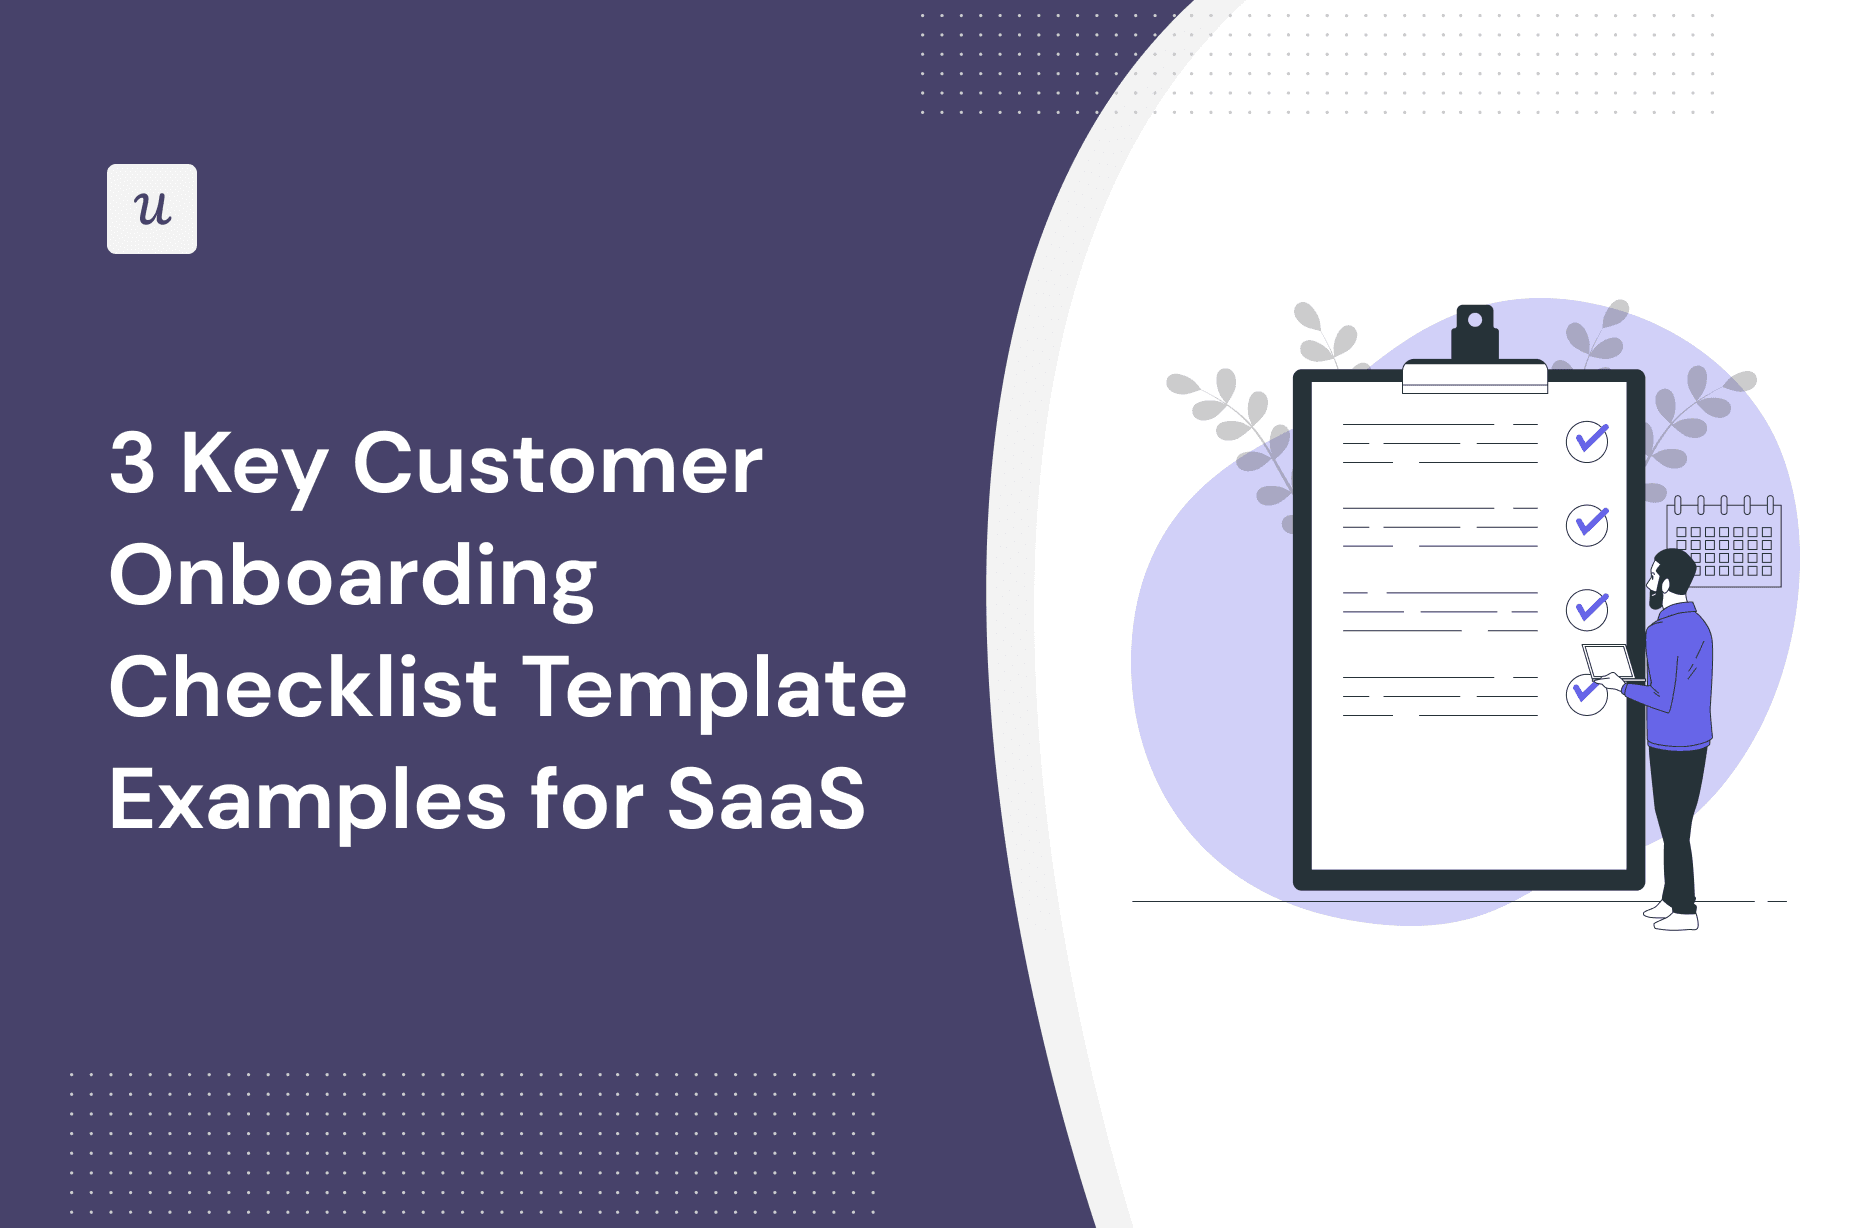 3 Key Customer Onboarding Checklist Template Examples for SaaS